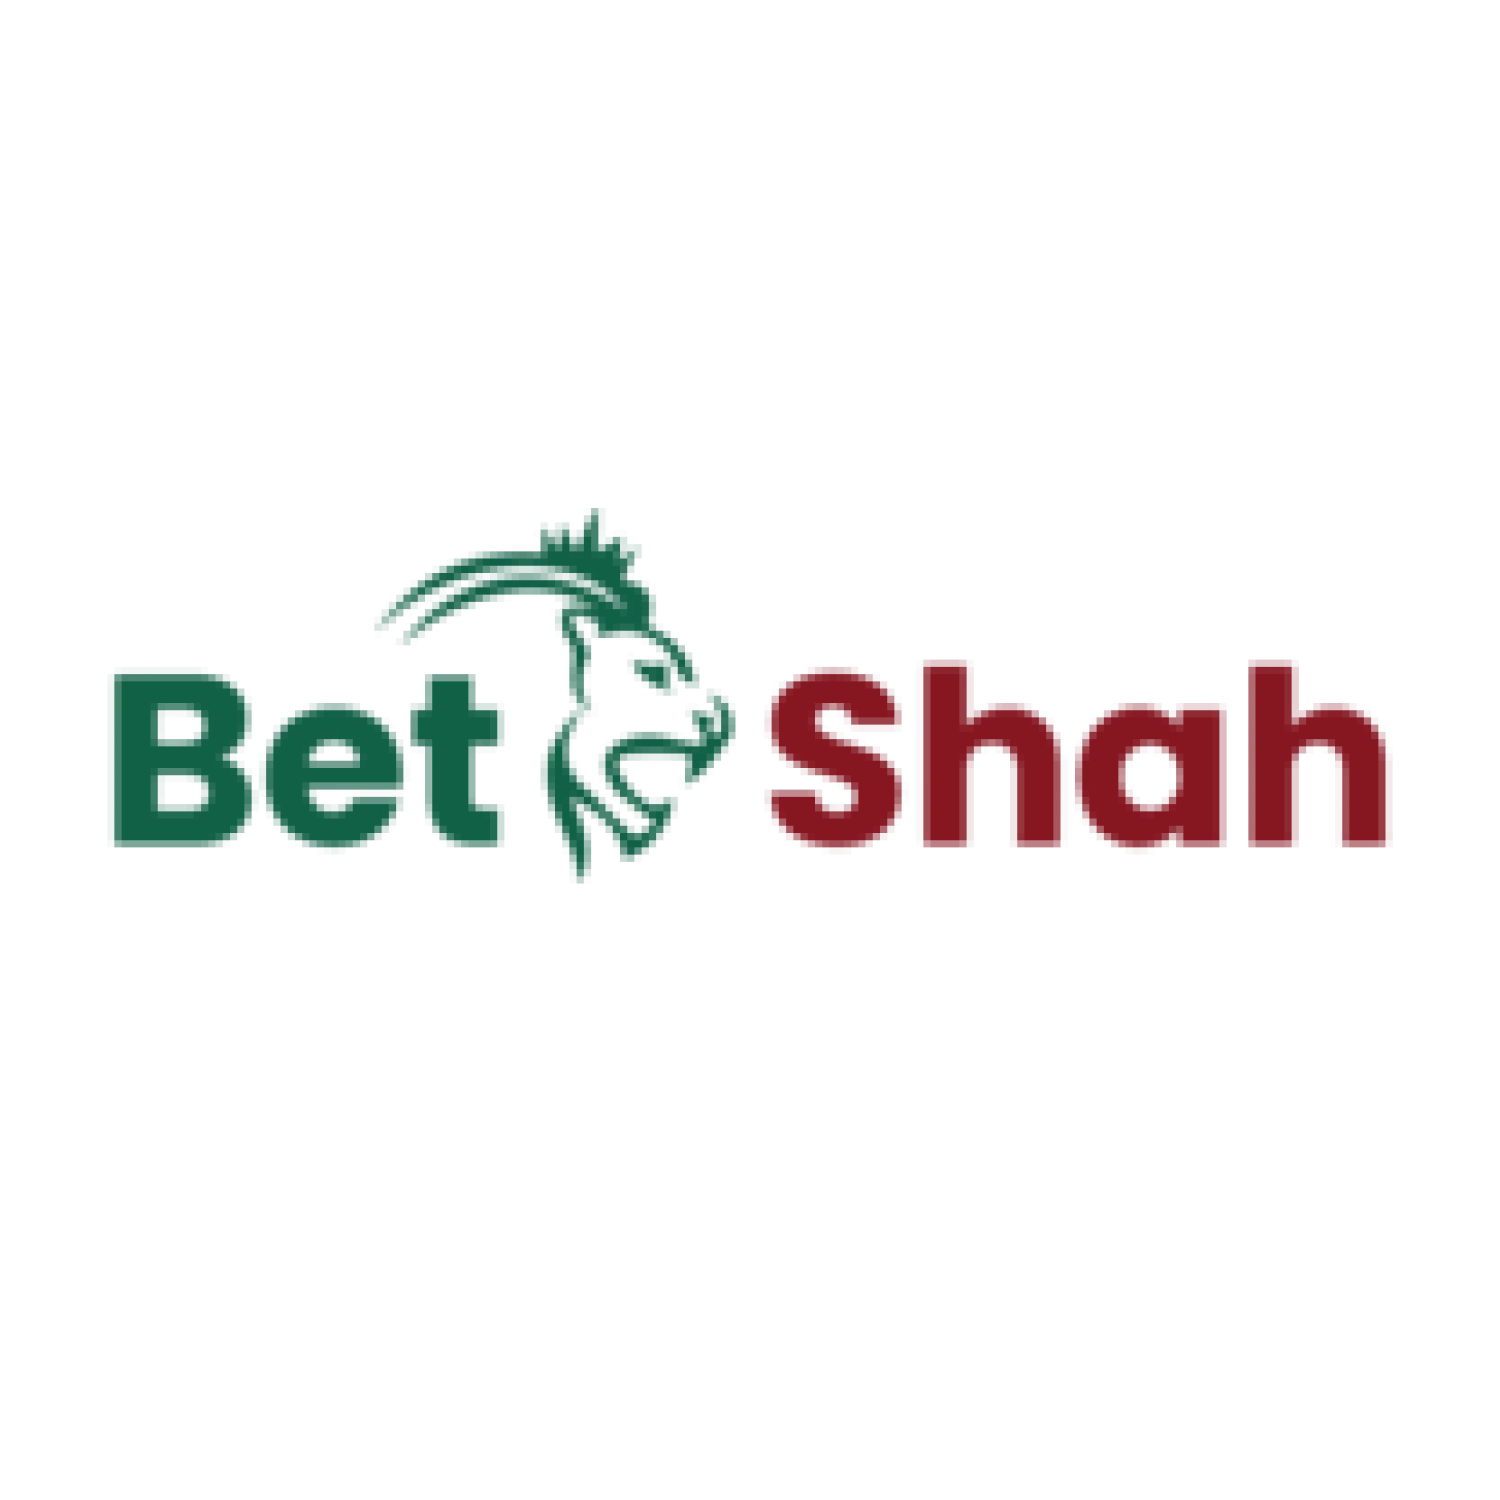 Betshah is a young bookmaker that operates legally in India.